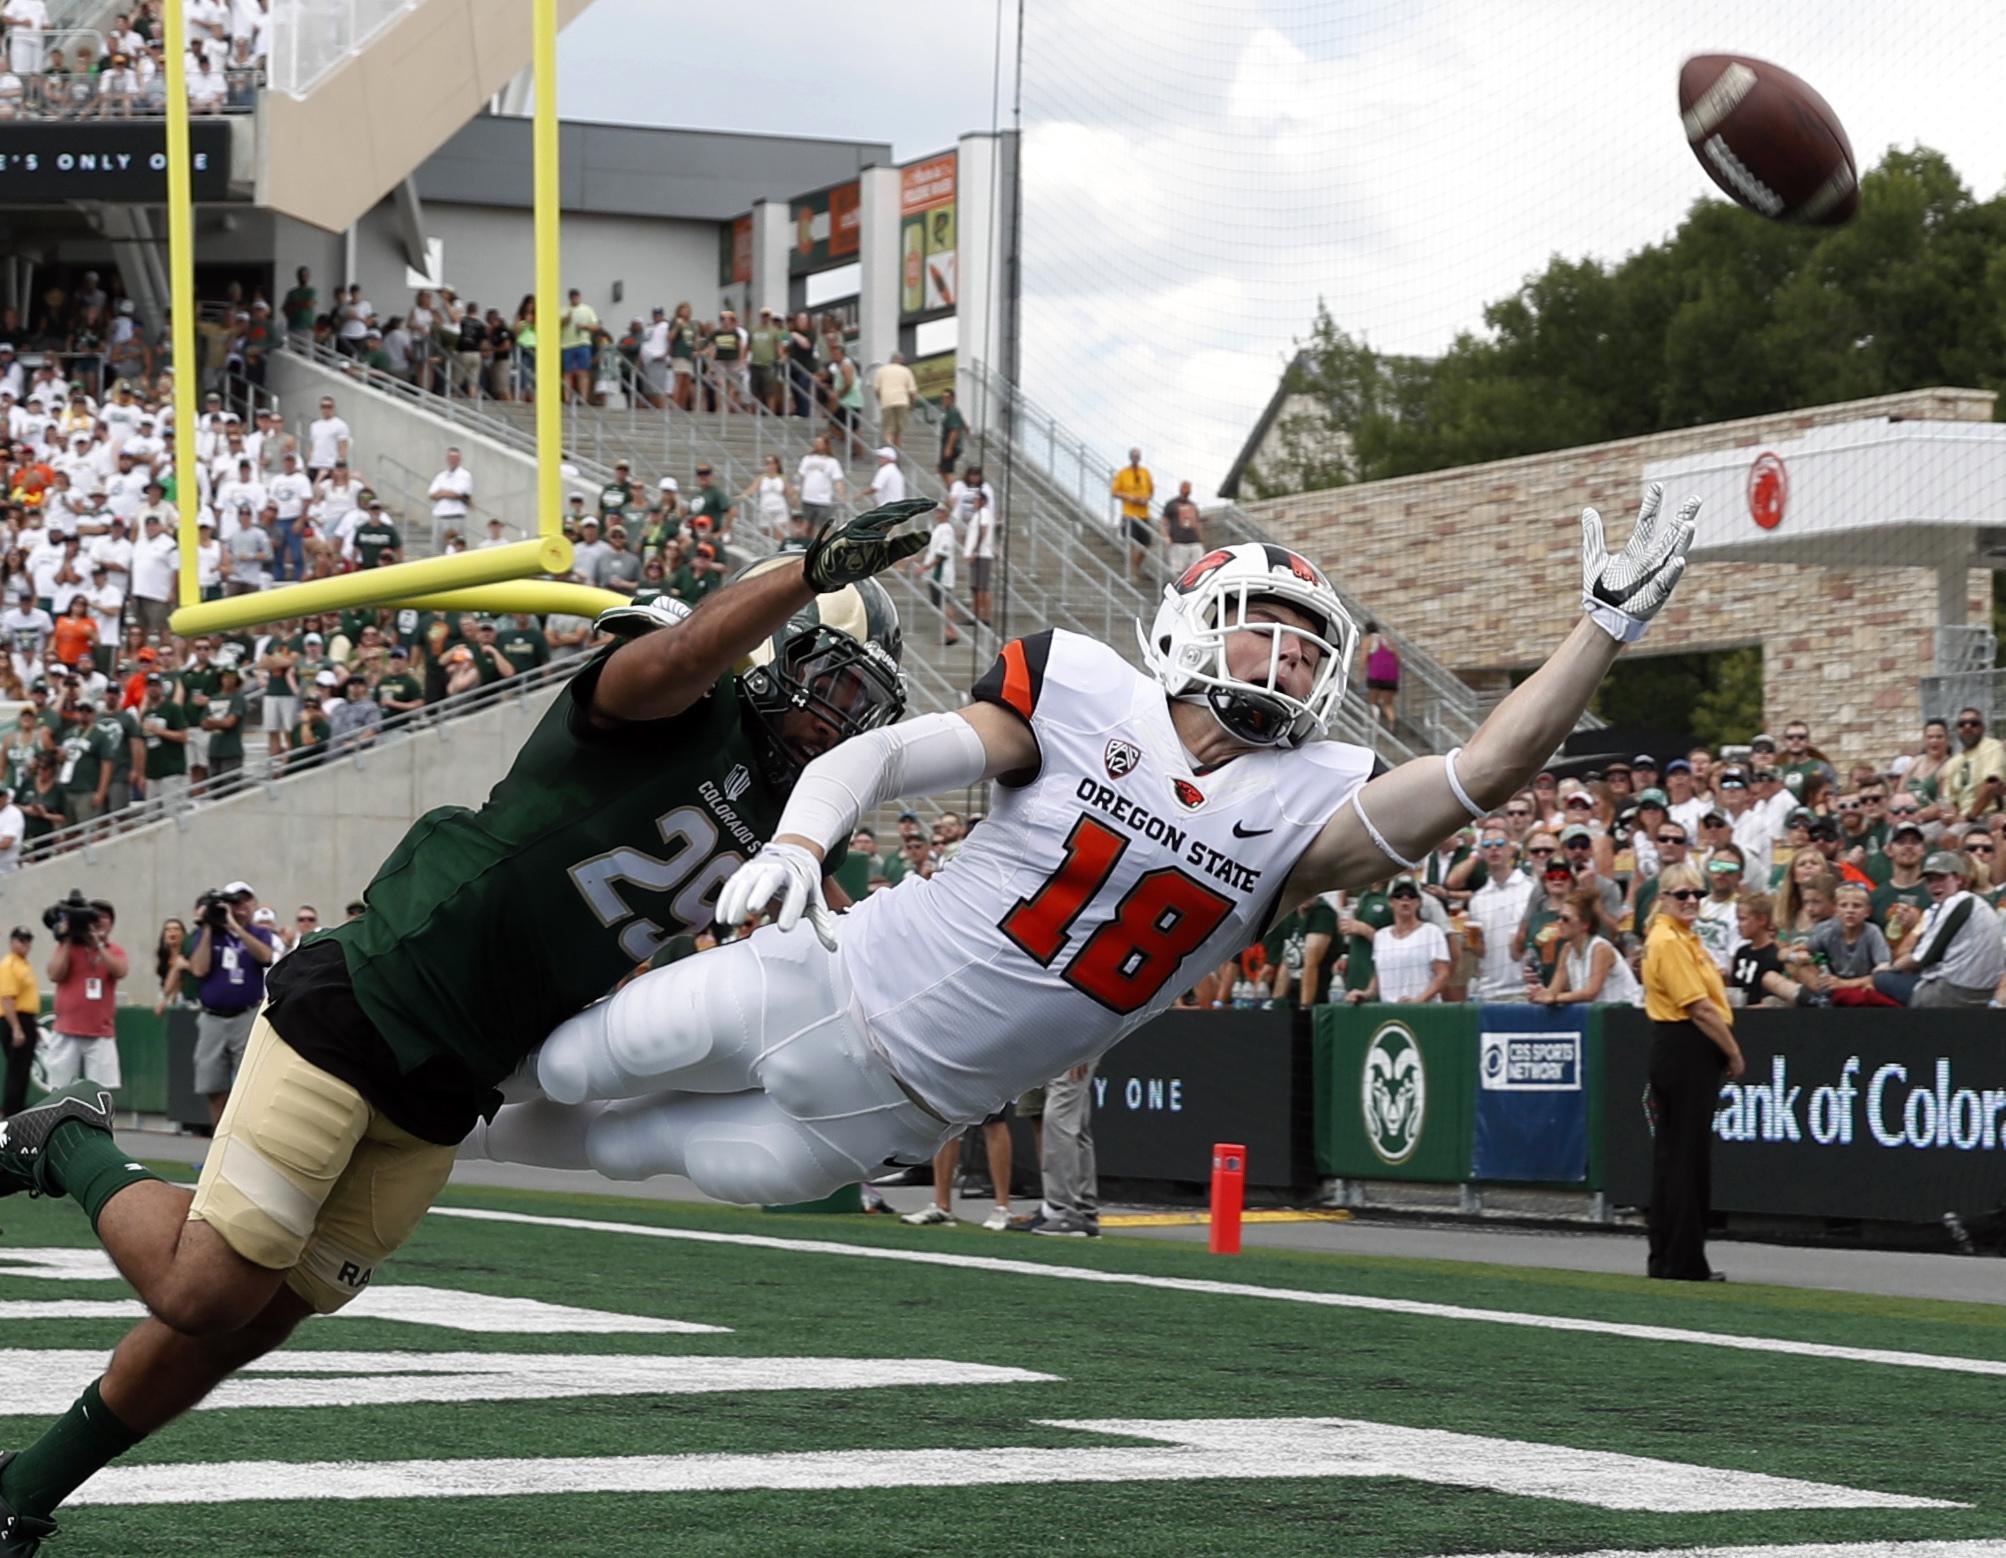 Colorado State Opens New Stadium By Beating Oregon State 58